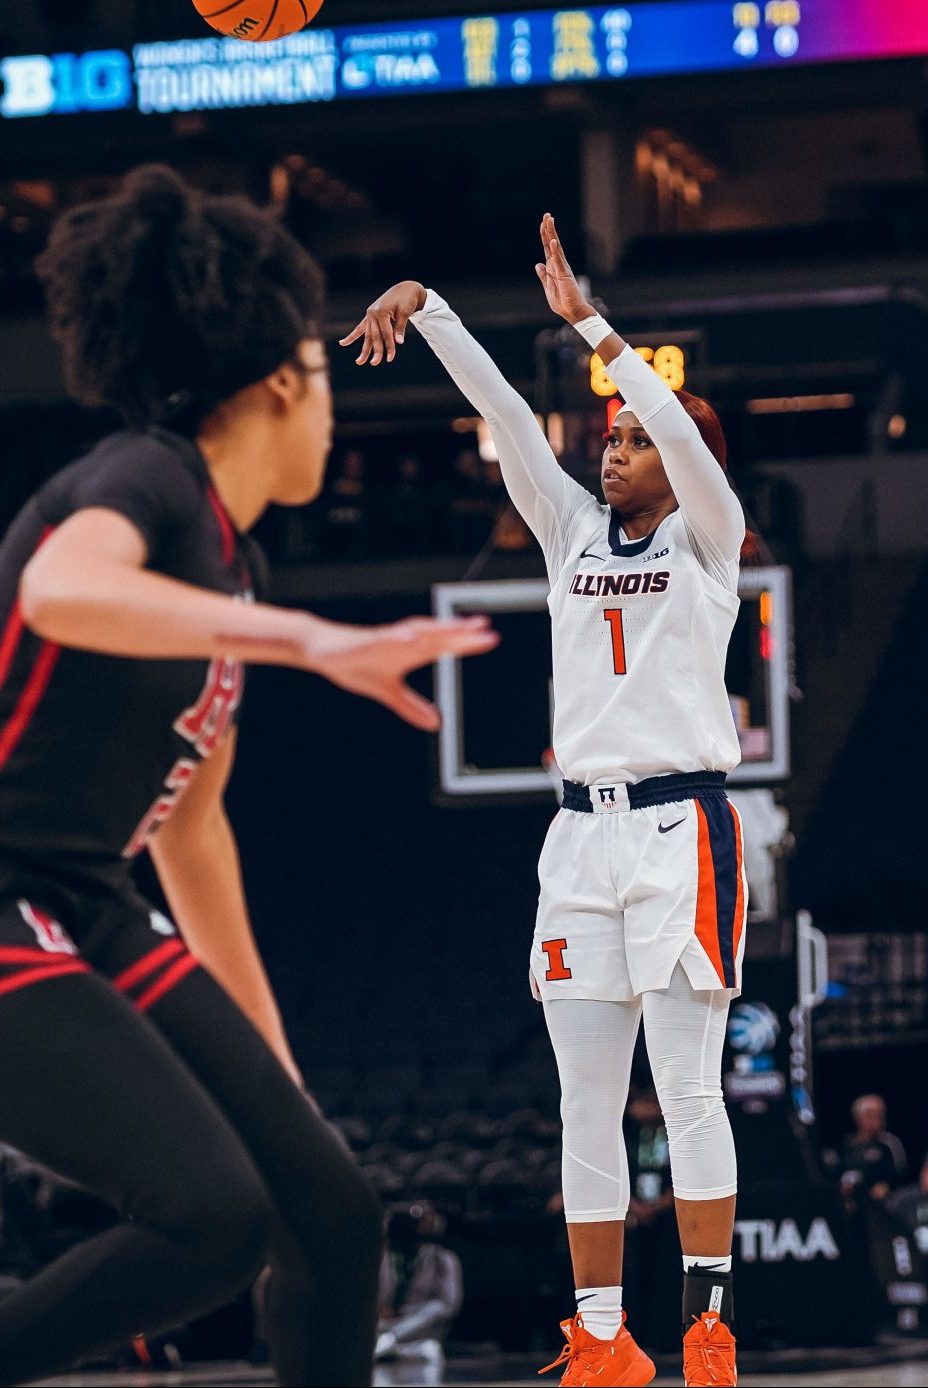 Big Ten Tournament Debut Served as Reintroduction of Ultra-Confident Illini Shooters